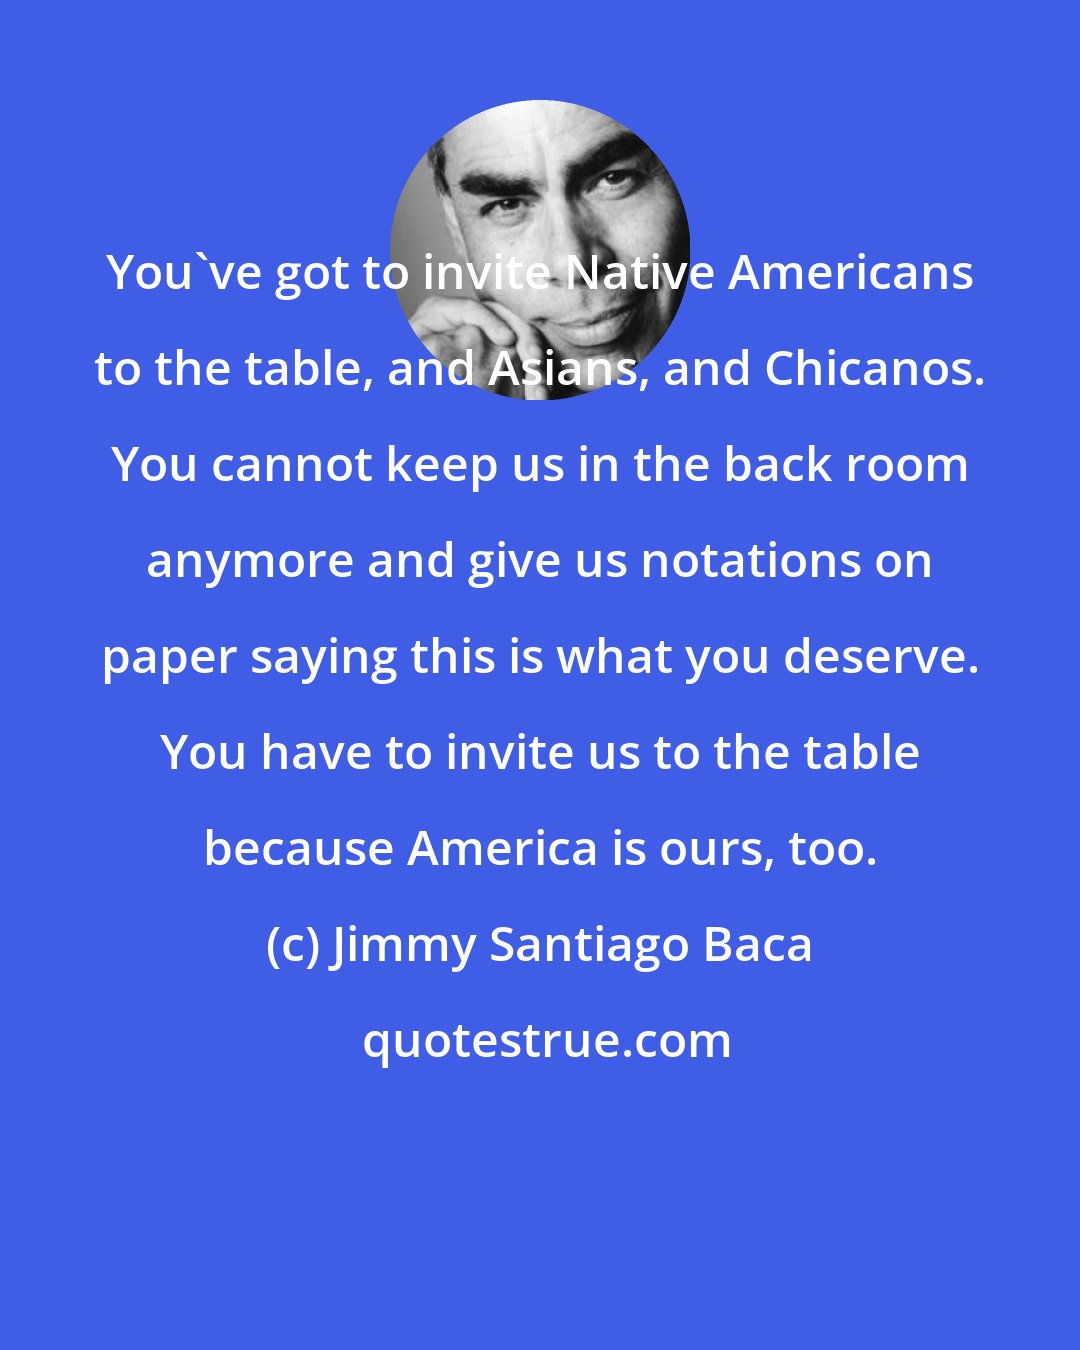 Jimmy Santiago Baca: You've got to invite Native Americans to the table, and Asians, and Chicanos. You cannot keep us in the back room anymore and give us notations on paper saying this is what you deserve. You have to invite us to the table because America is ours, too.